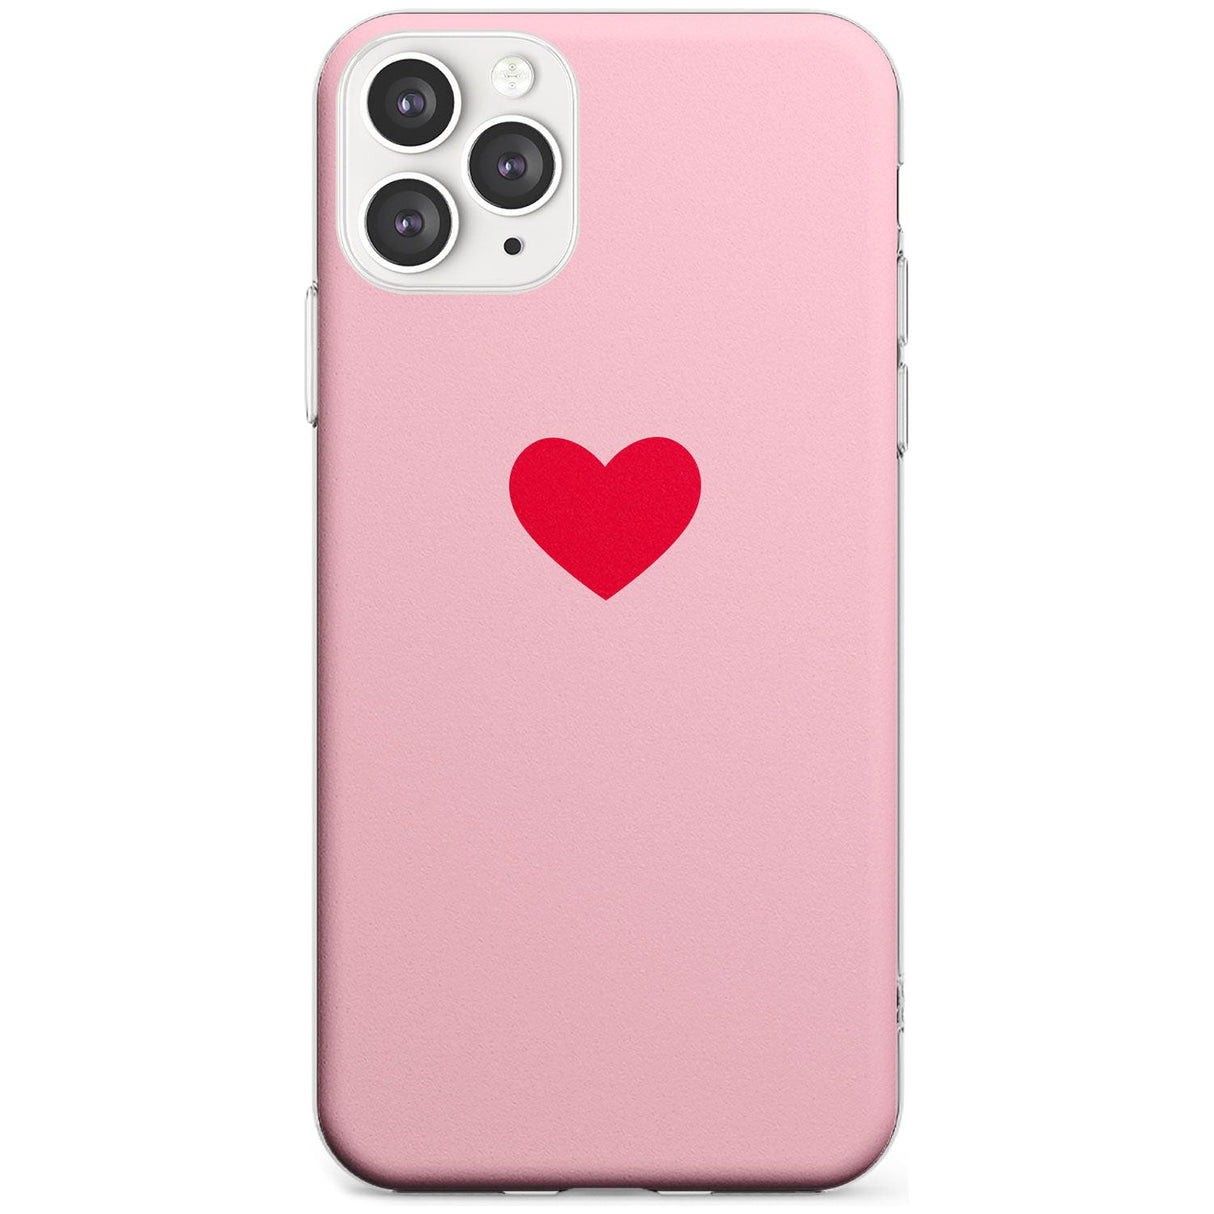 Single Heart Red & Pink Slim TPU Phone Case for iPhone 11 Pro Max